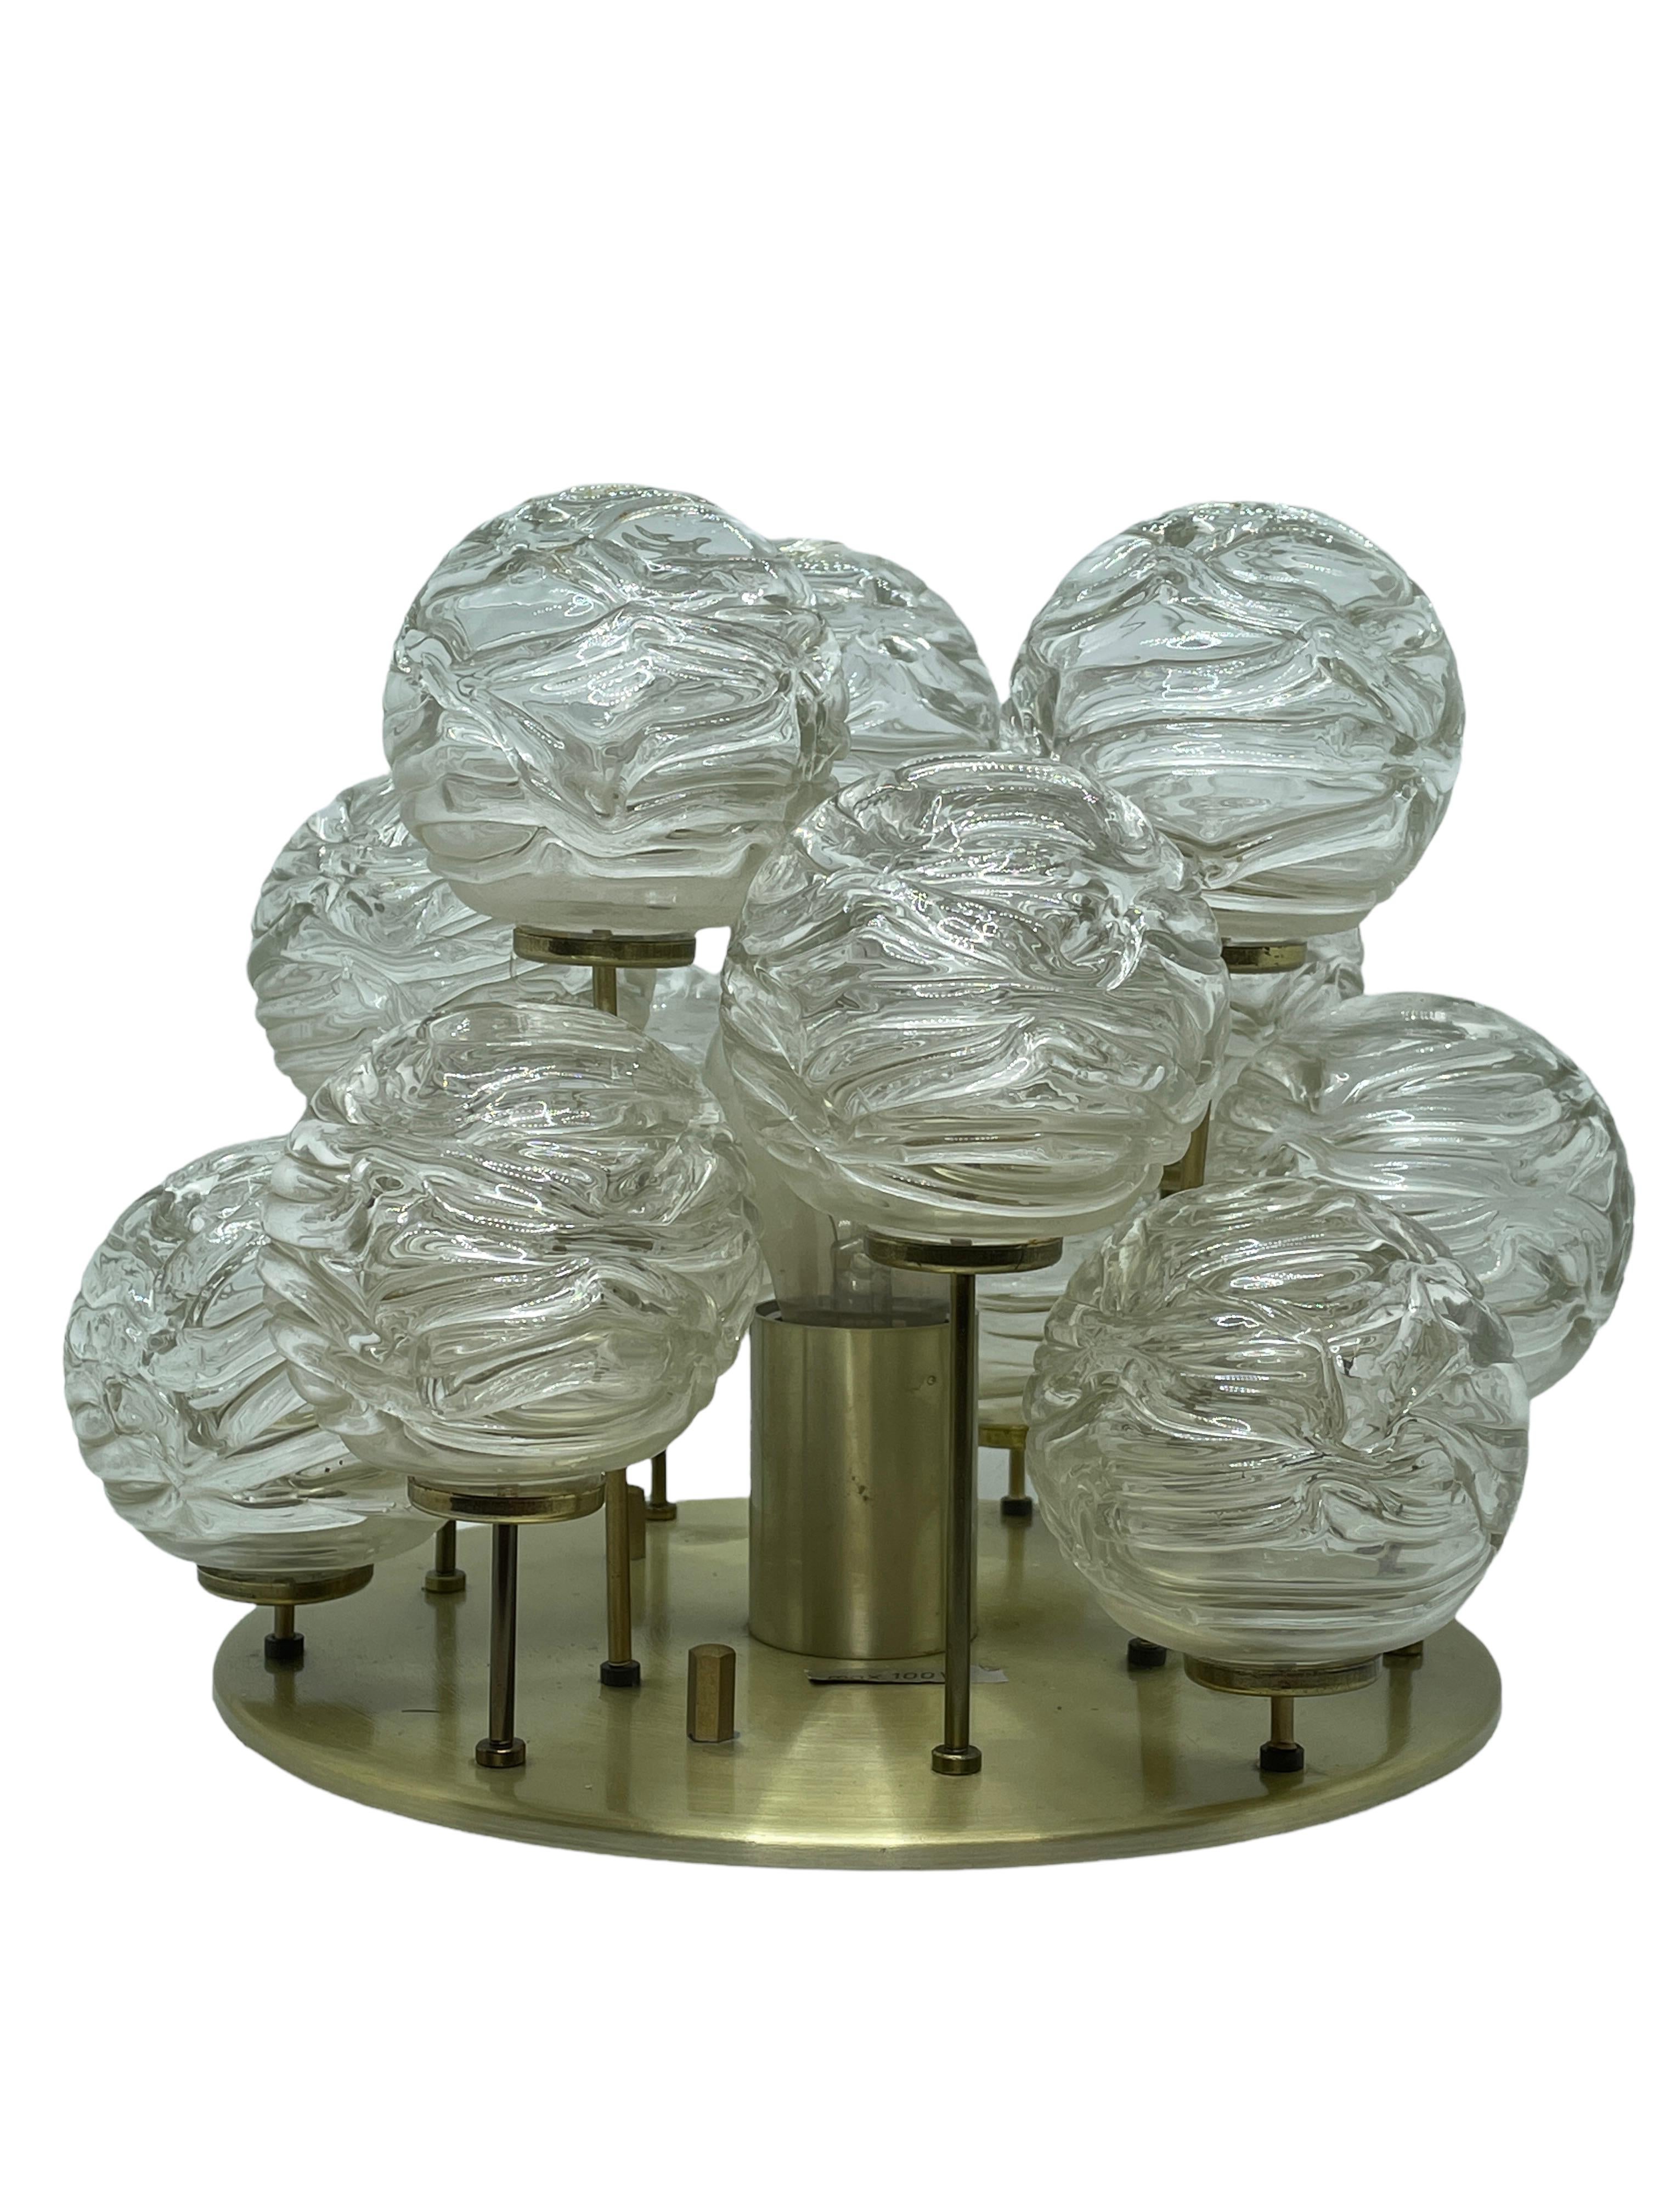 Swirled glass ball flush mount fixture by Doria Leuchten, Germany. The handblown glass ball elements are attached to brass rods in varying lengths that when illuminated by the single light source makes a beautiful light. The Fixture requires a